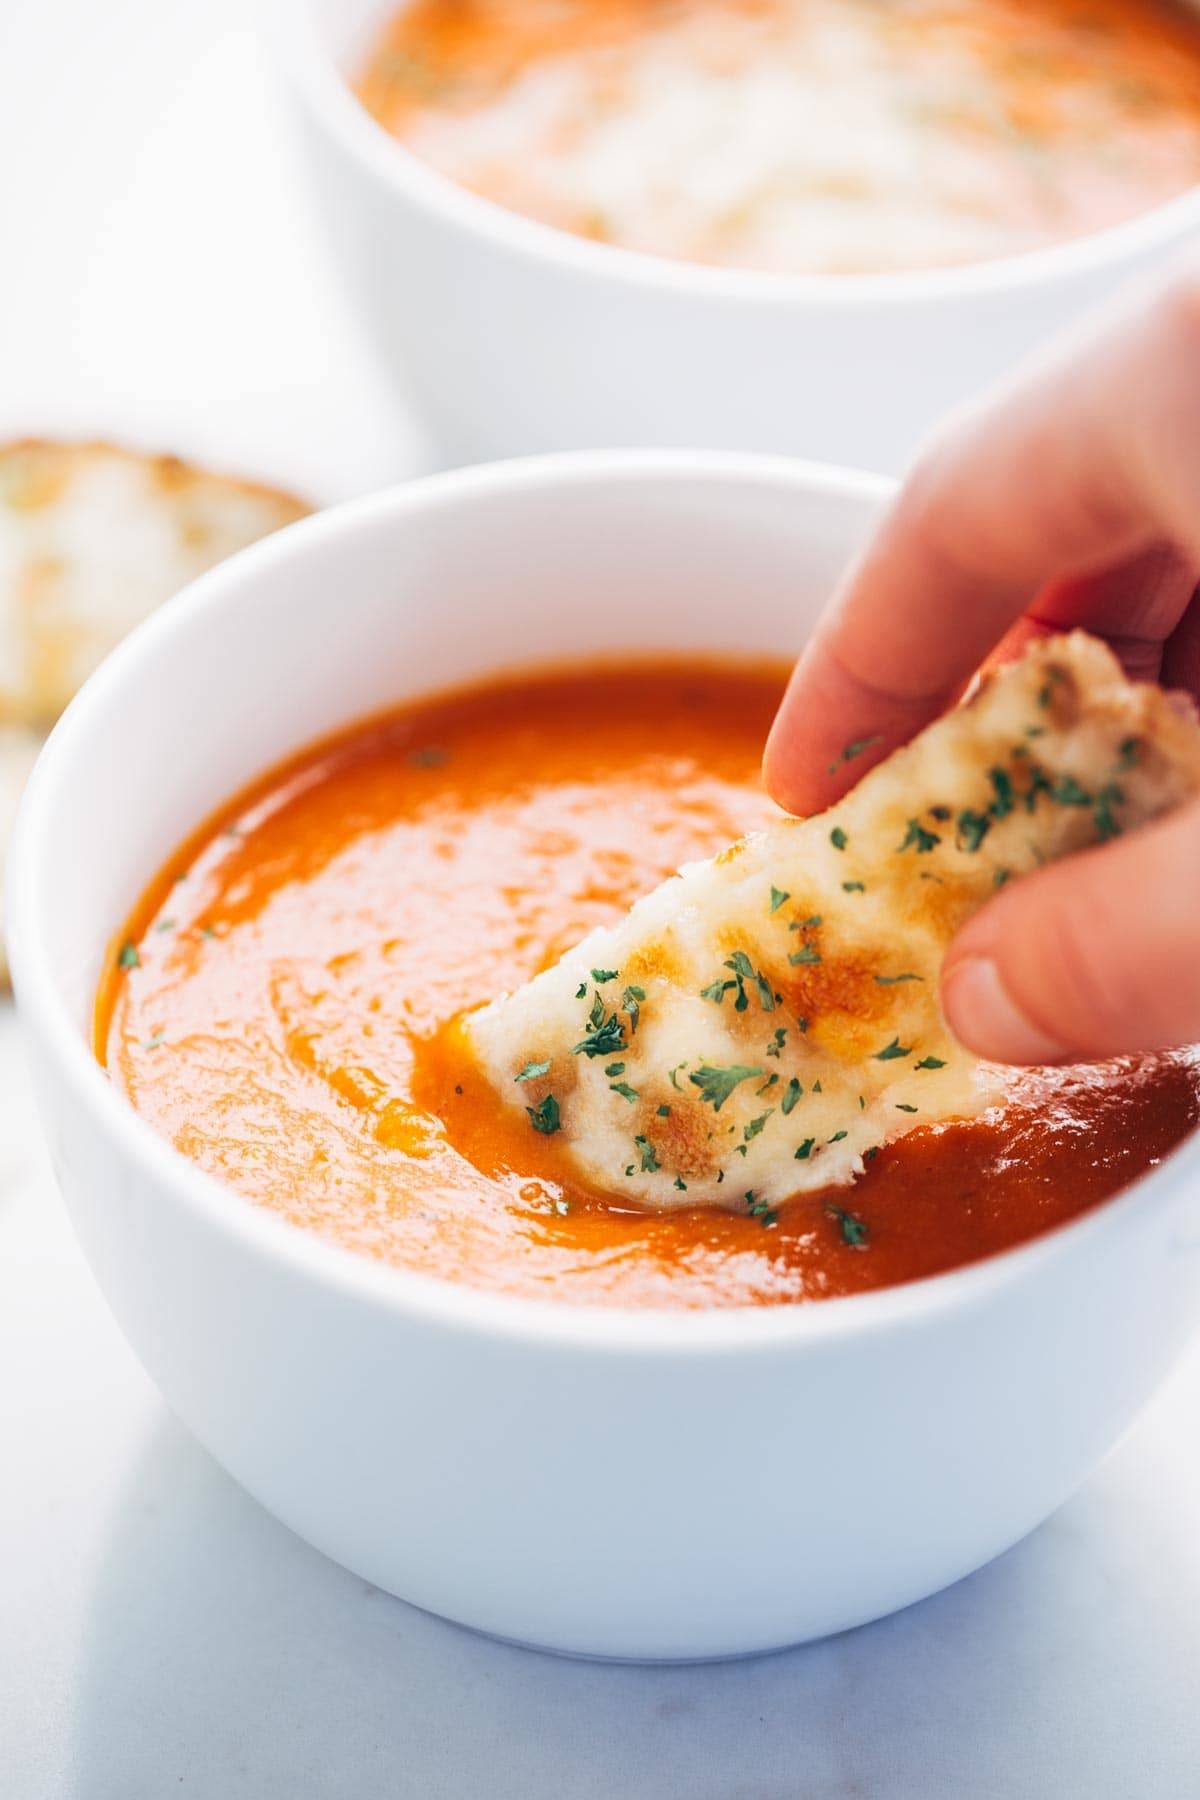 Homemade tomato soup in a bowl with bread dipped in.